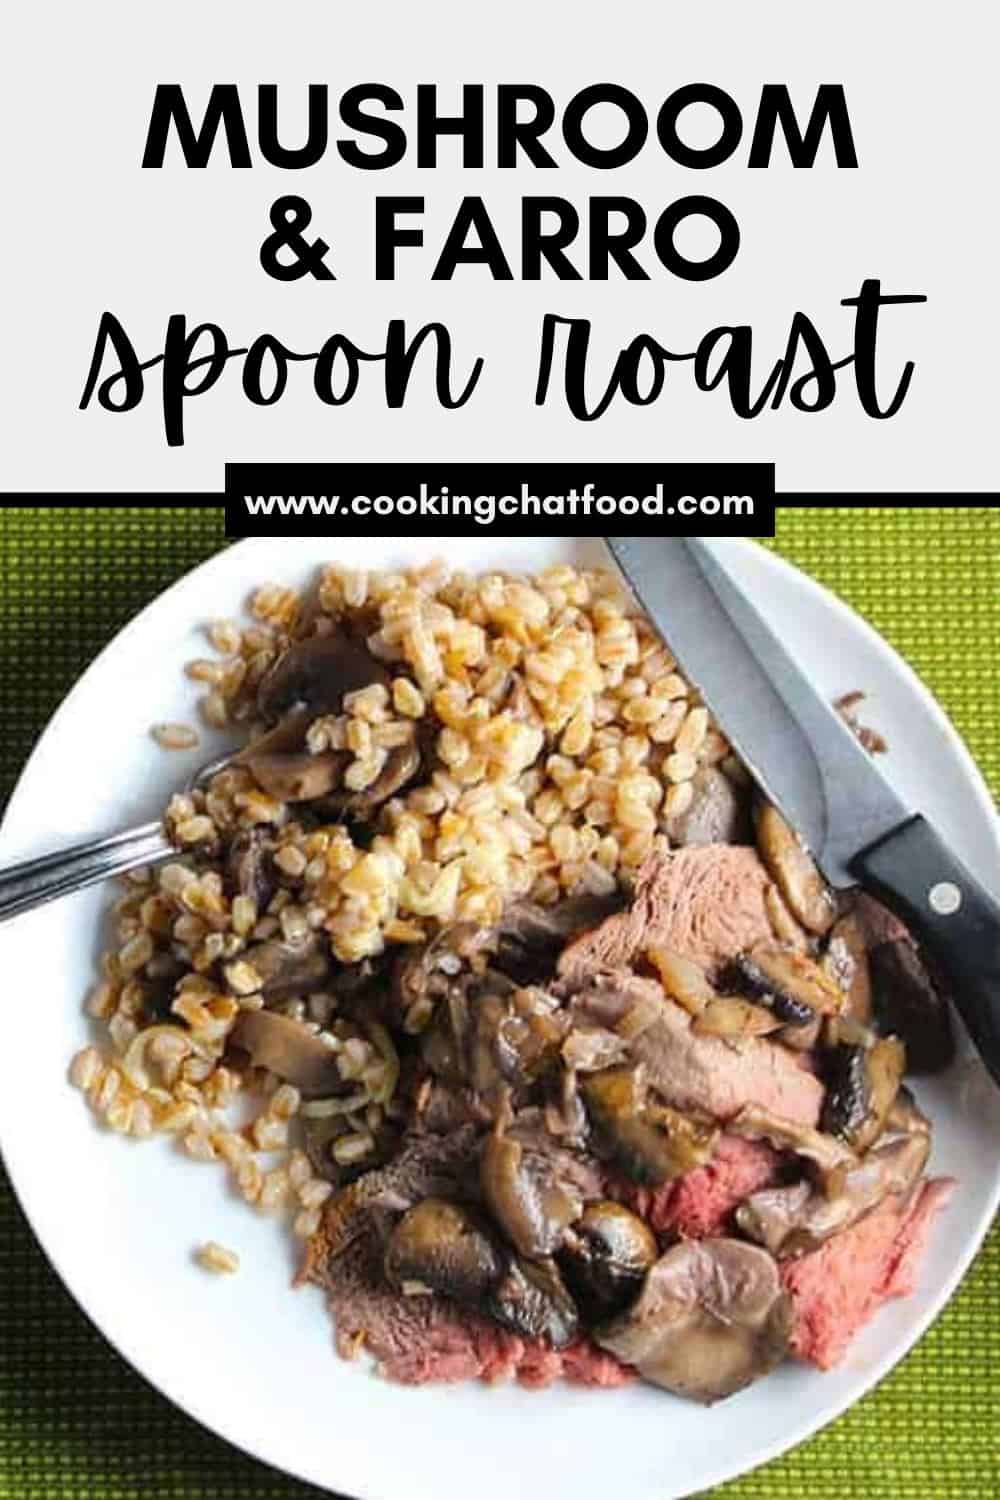 Slices of Spoon Roast beef topped with mushrooms and served with a side of farro grain.